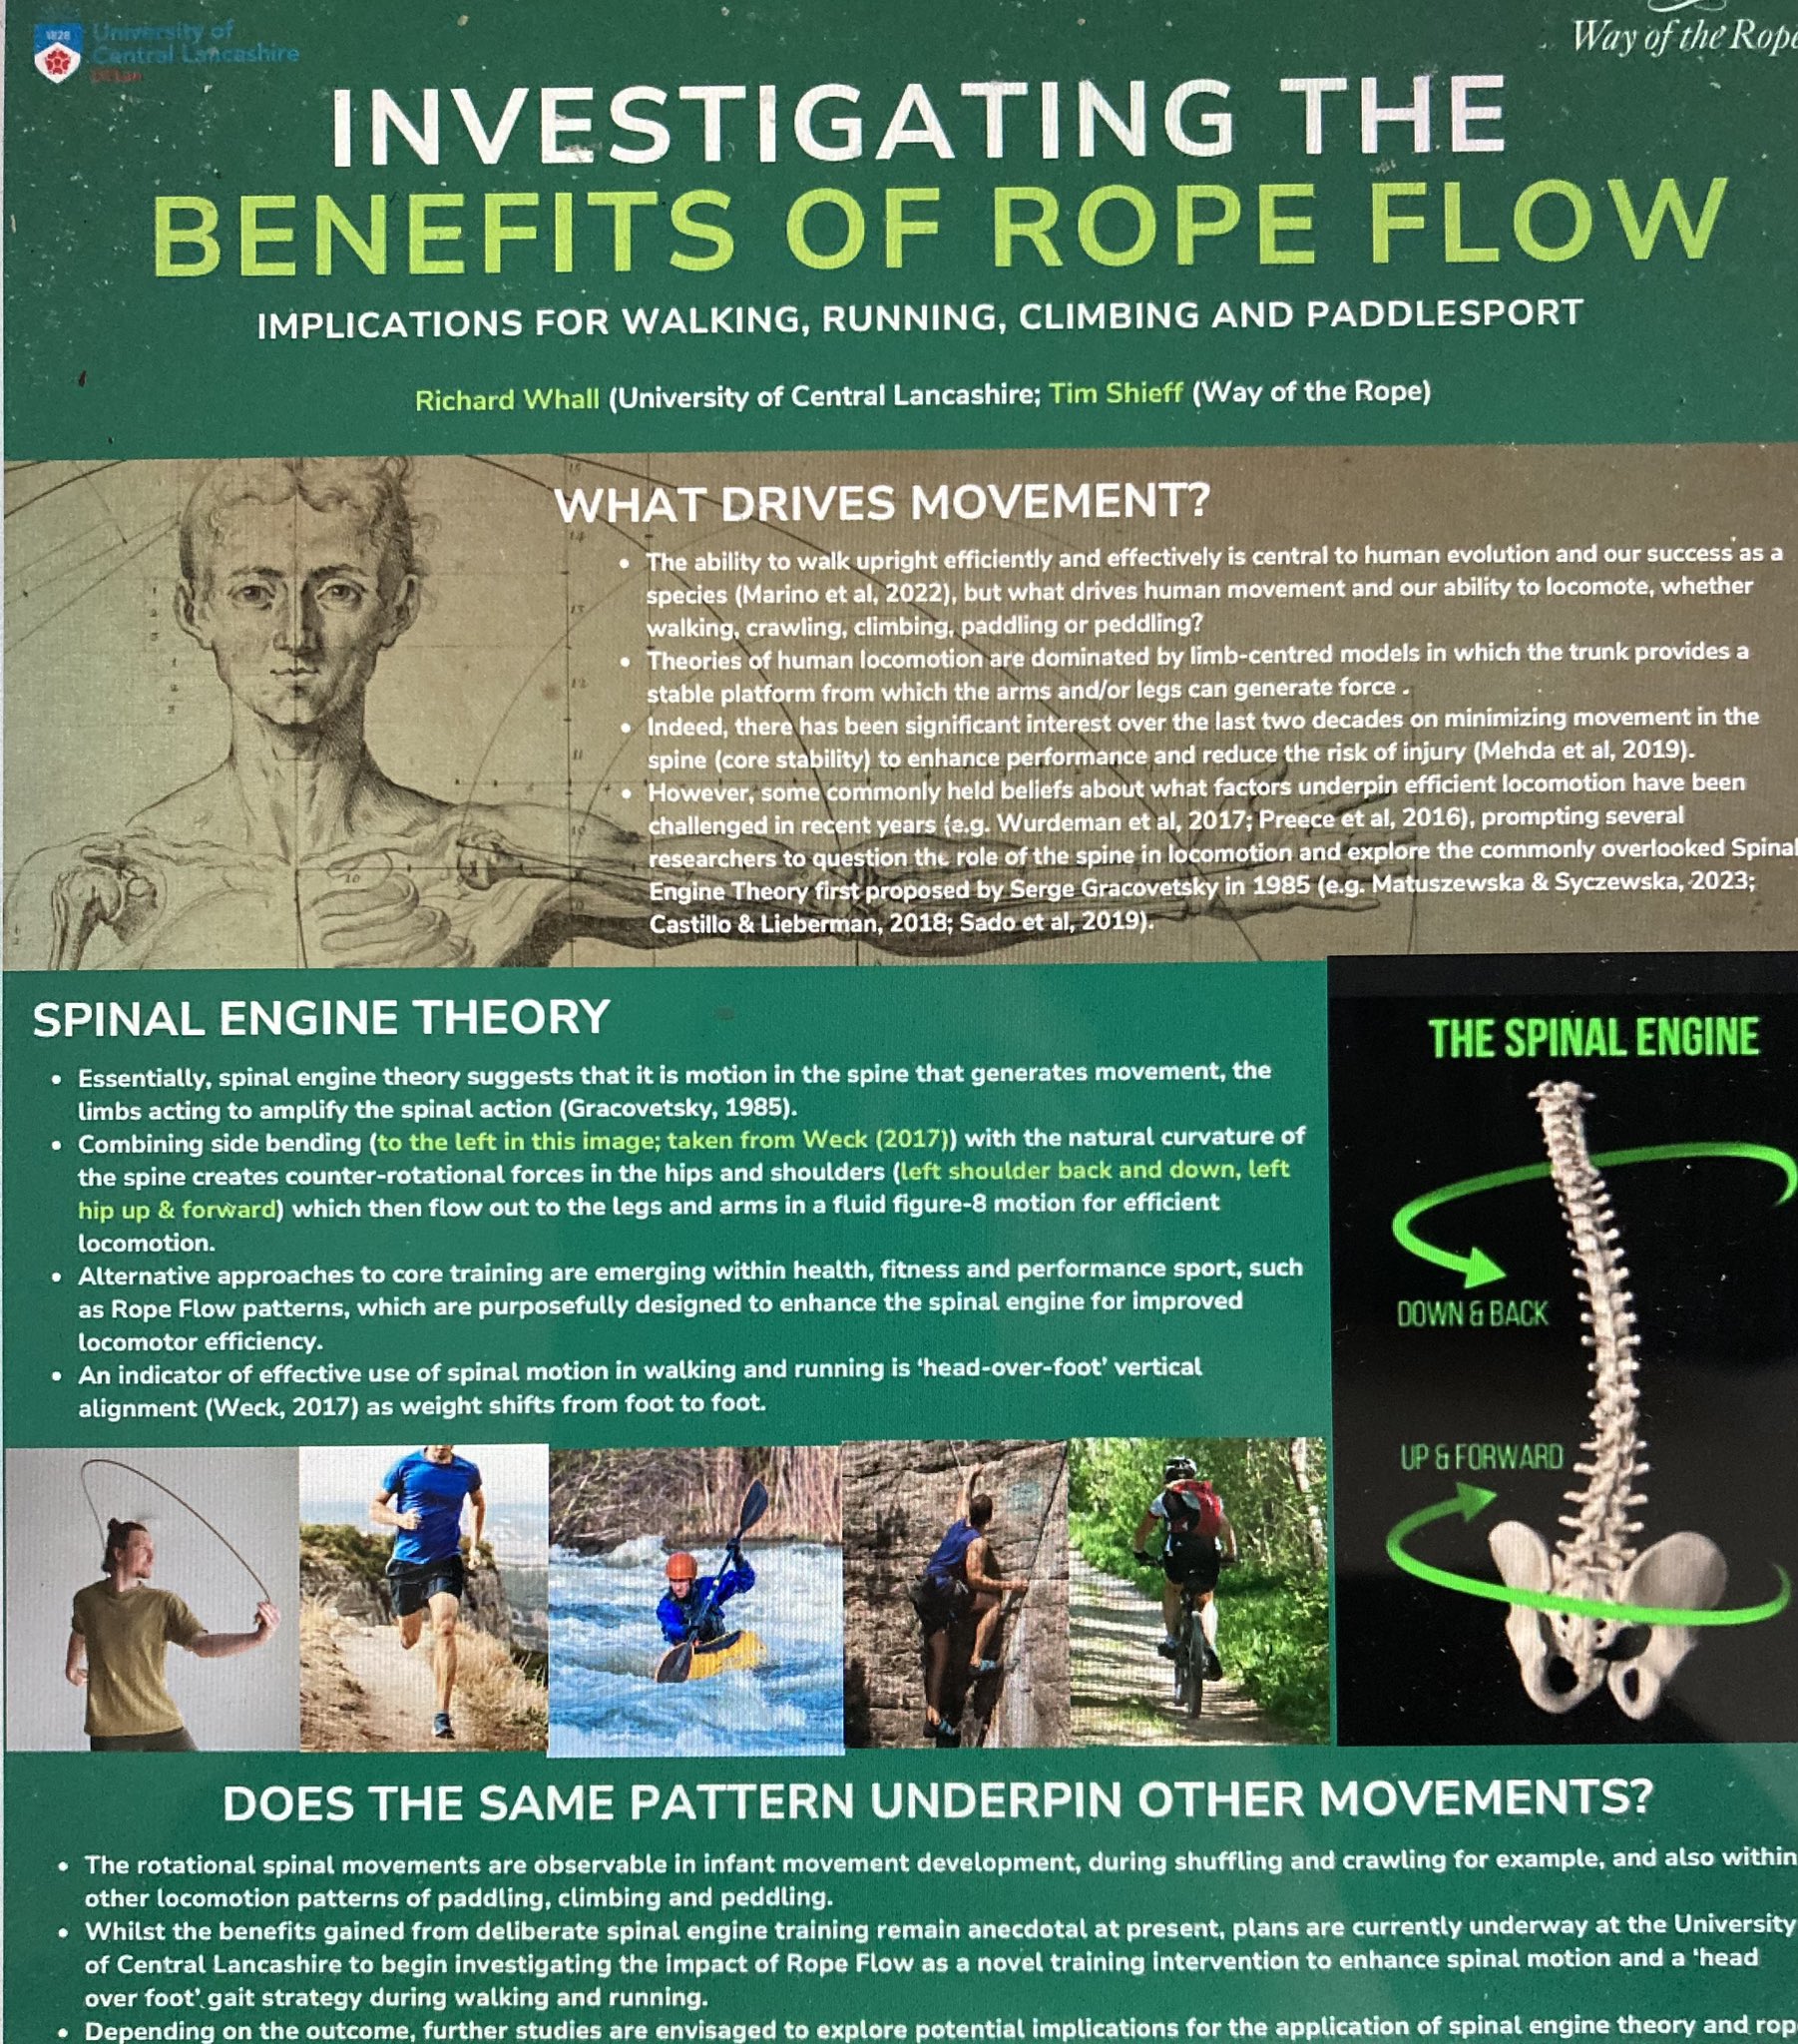 Richard Whall on X: Looking forward to another great day of learning  @IOLOutdoorProfs #IOLNWConf24 on Friday @CumbriaUni facilitating an  introductory #ropeflow workshop and sharing plans for research  @UCLanSportHS & @thewayoftherope @HumanTimothy